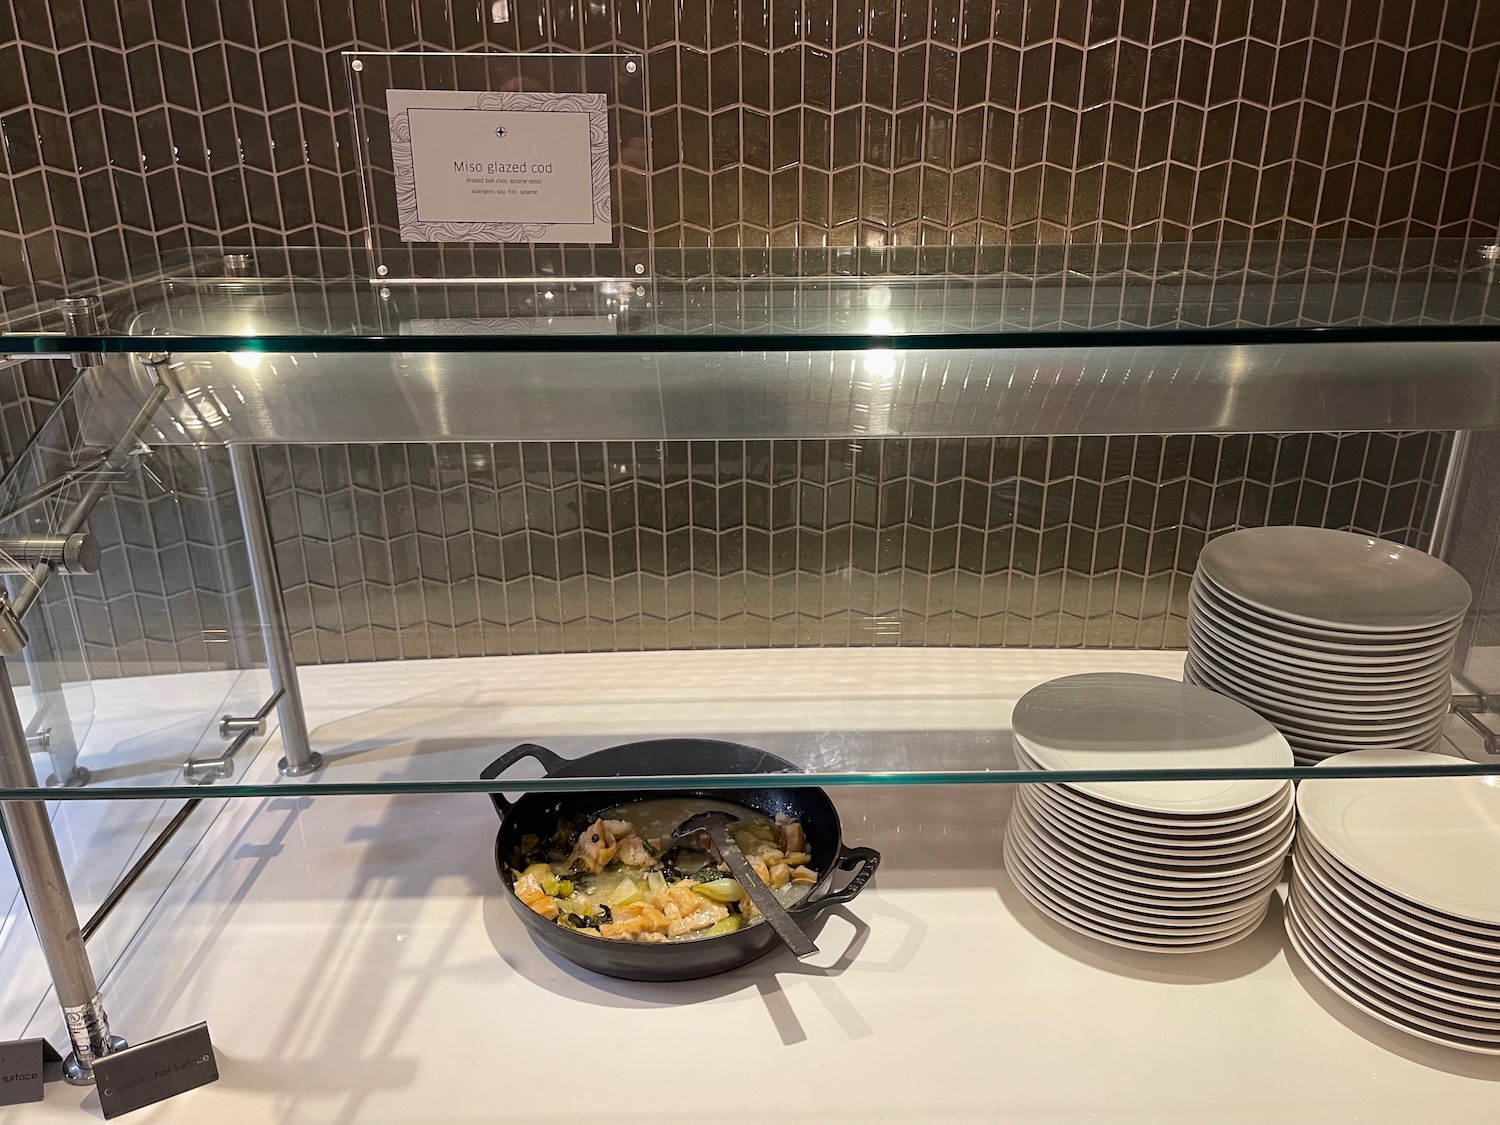 a pan with food on it on a glass shelf